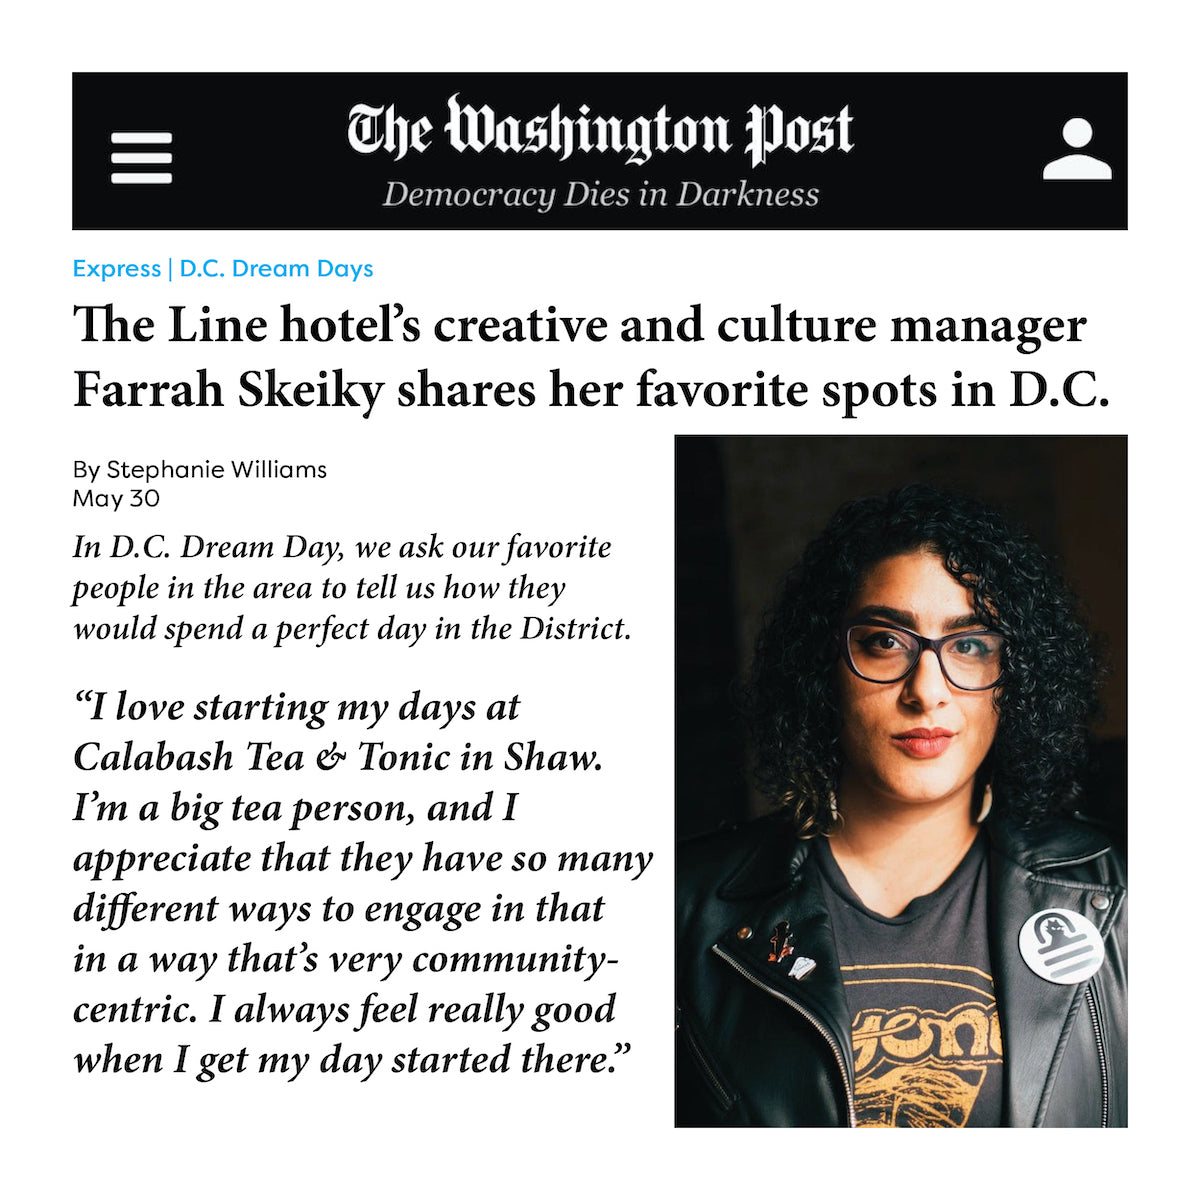 The Washington Post - Farrah Skeiky shares her favorite spots in DC